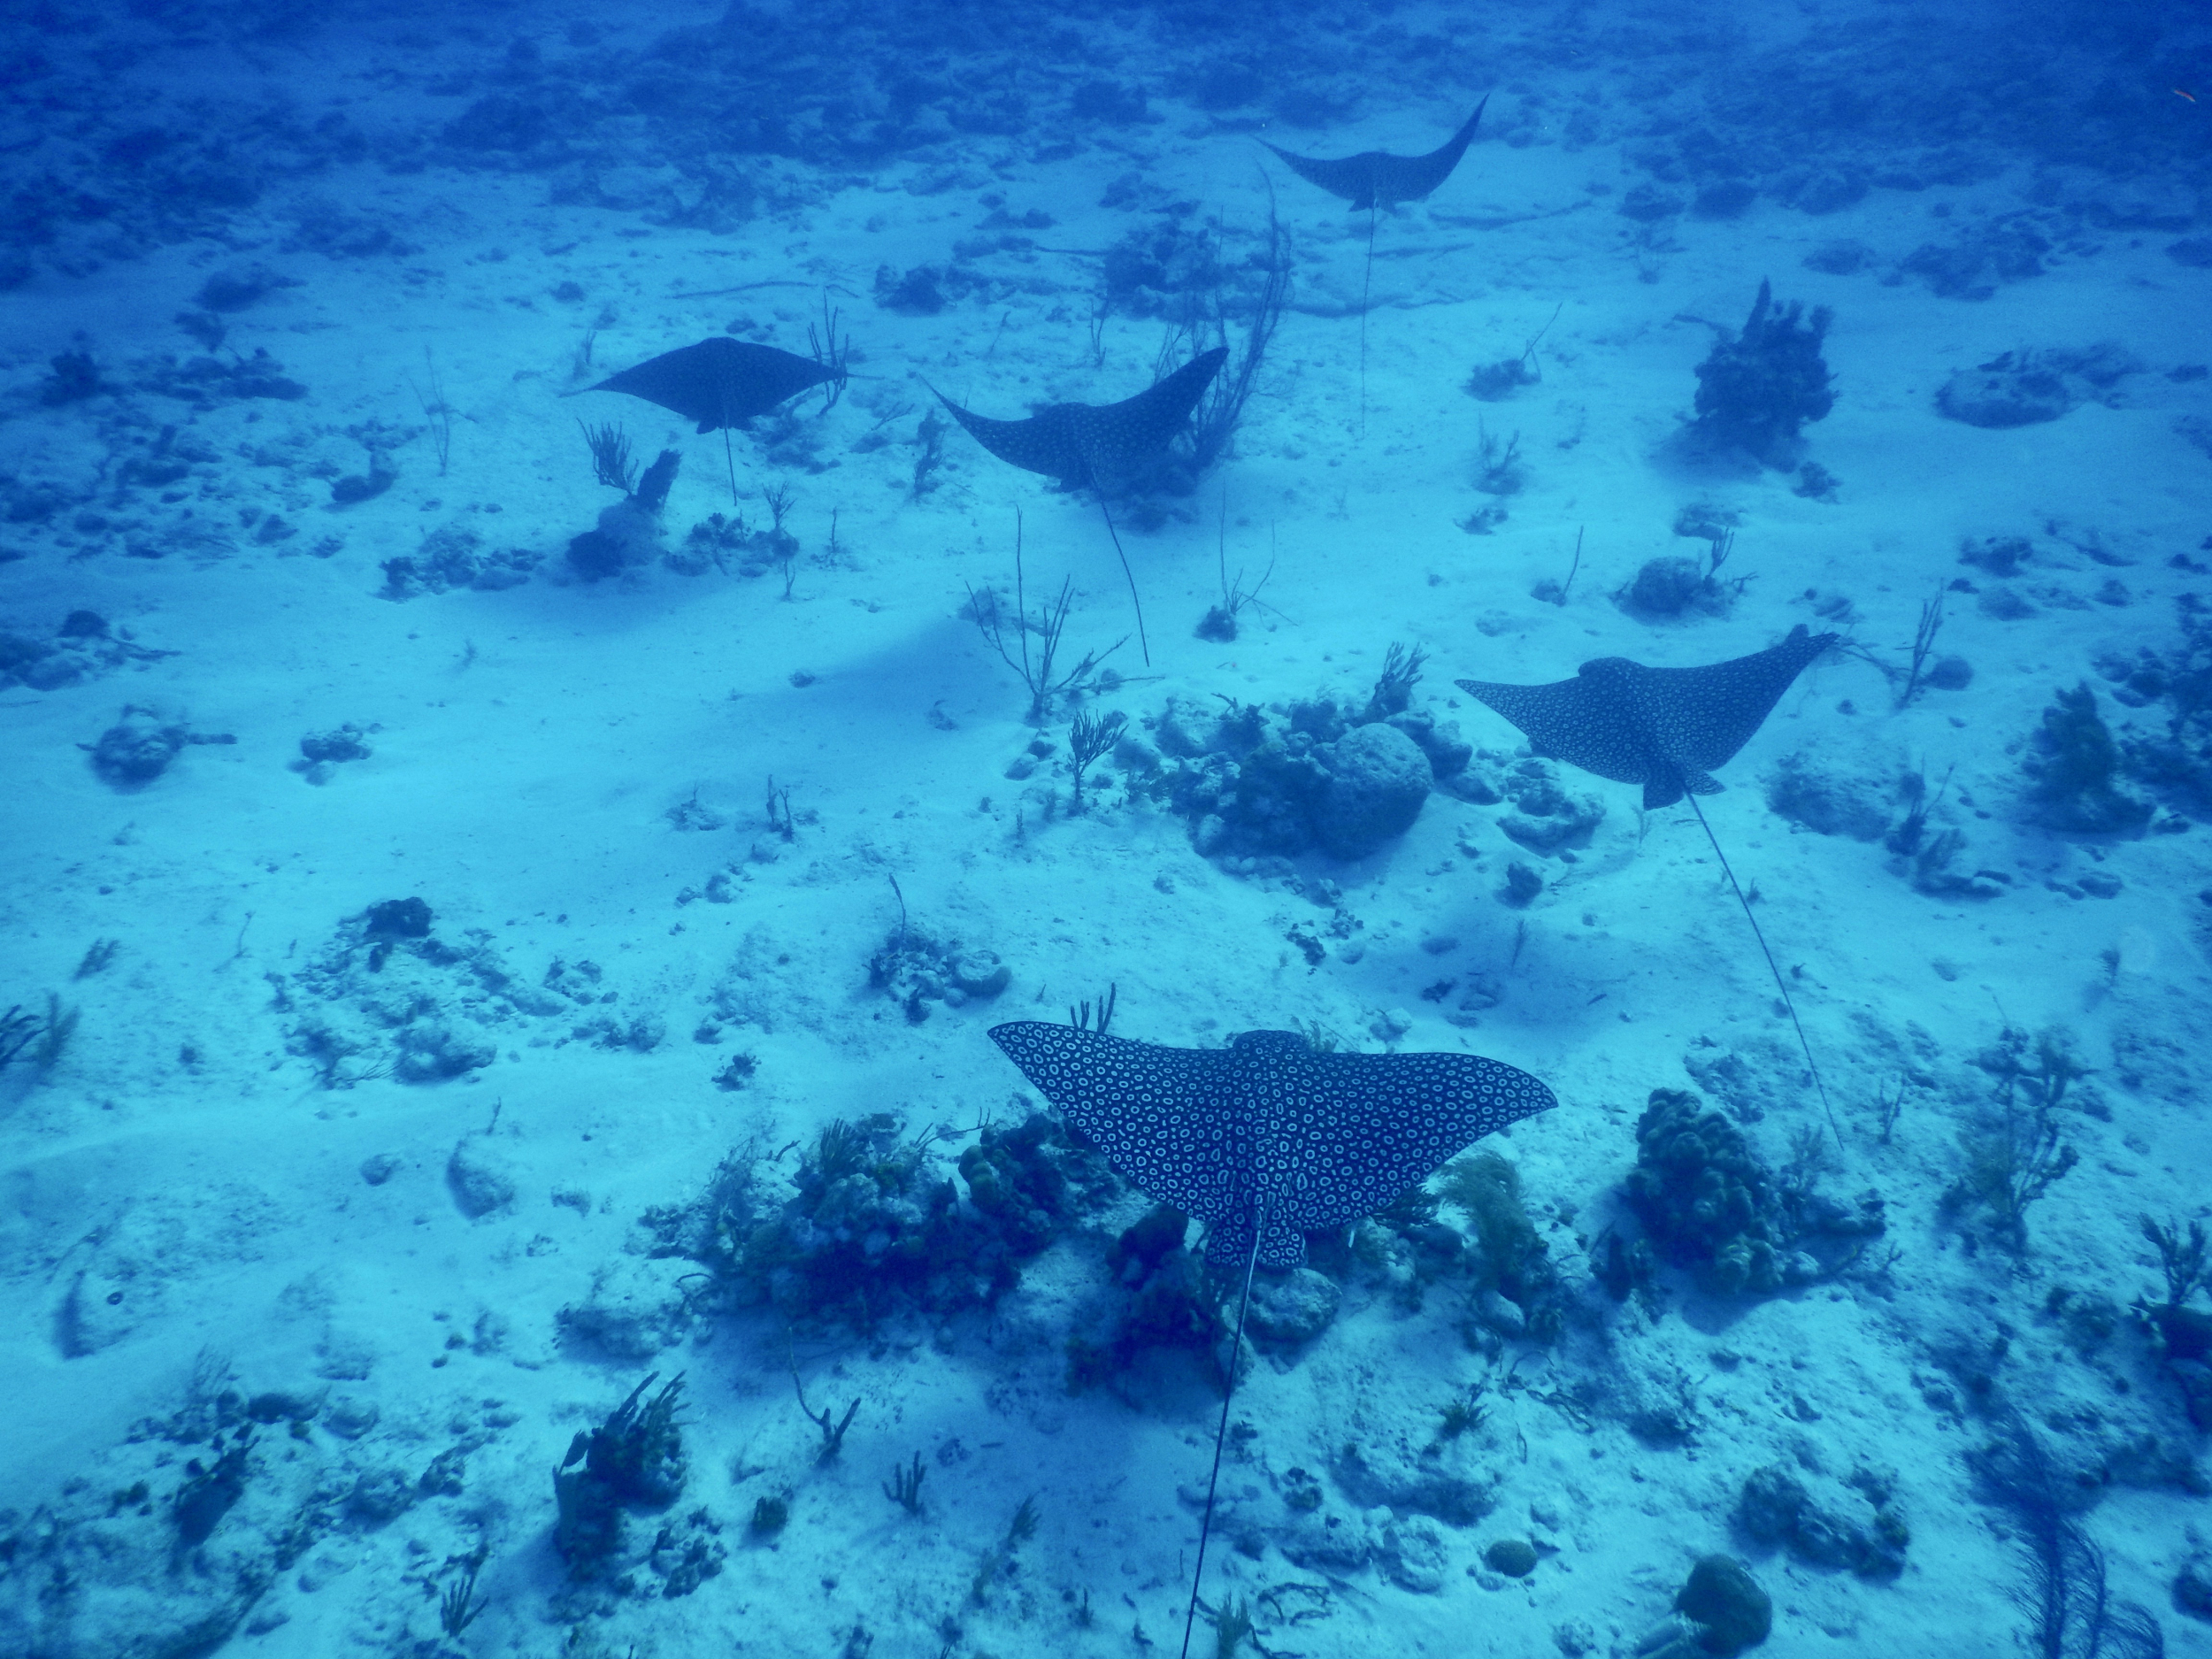 69. School of spotted eagle rays